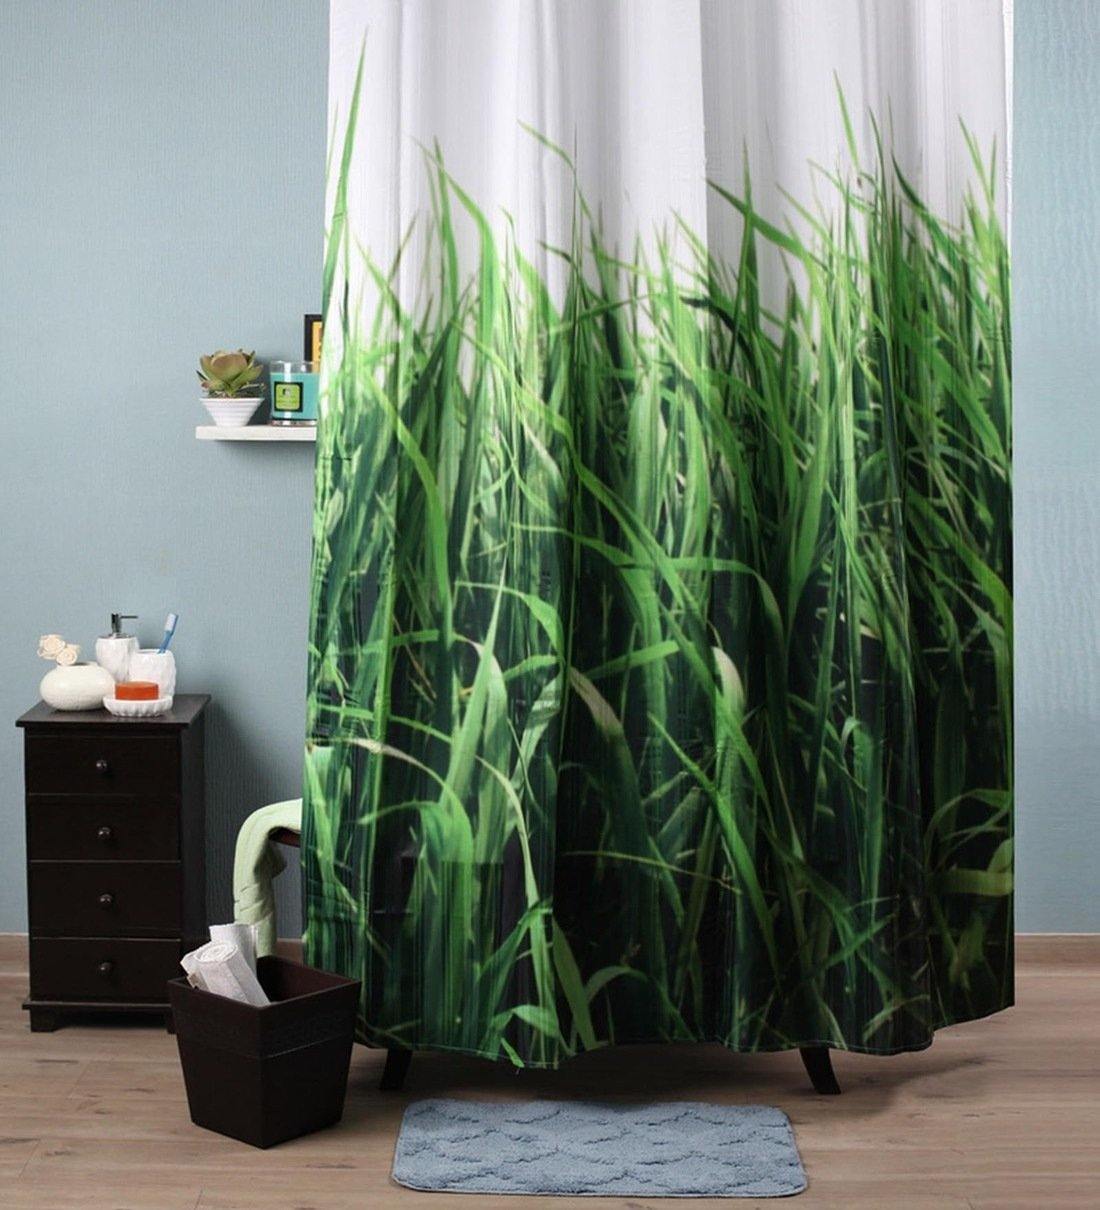 Lushomes Grass Digital Printed Bathroom Shower Curtain with 10 Eyelets - Lushomes